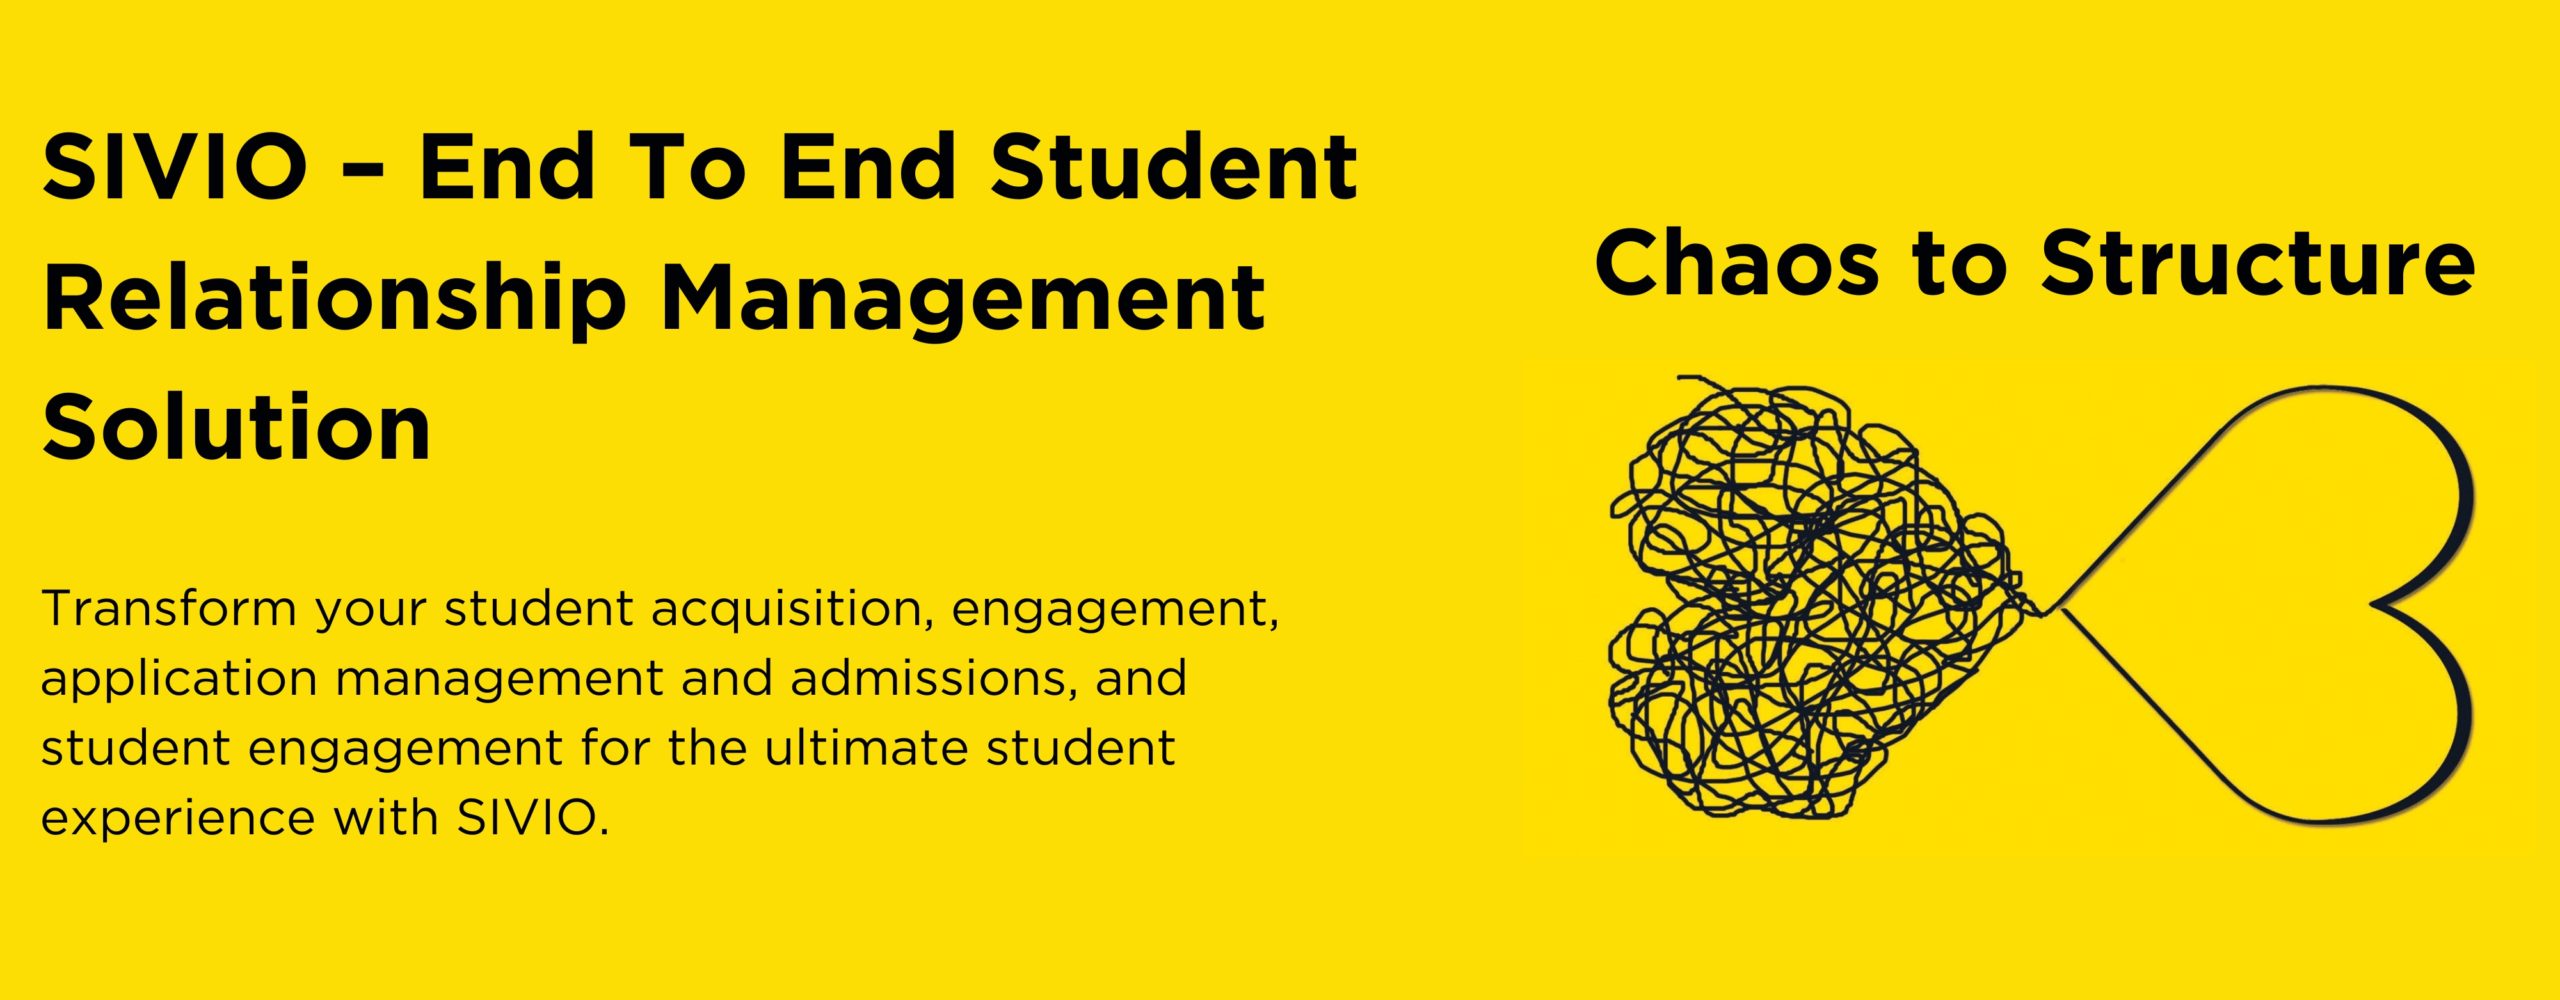 SIVIO – End To End Student Relationship Management Solution
